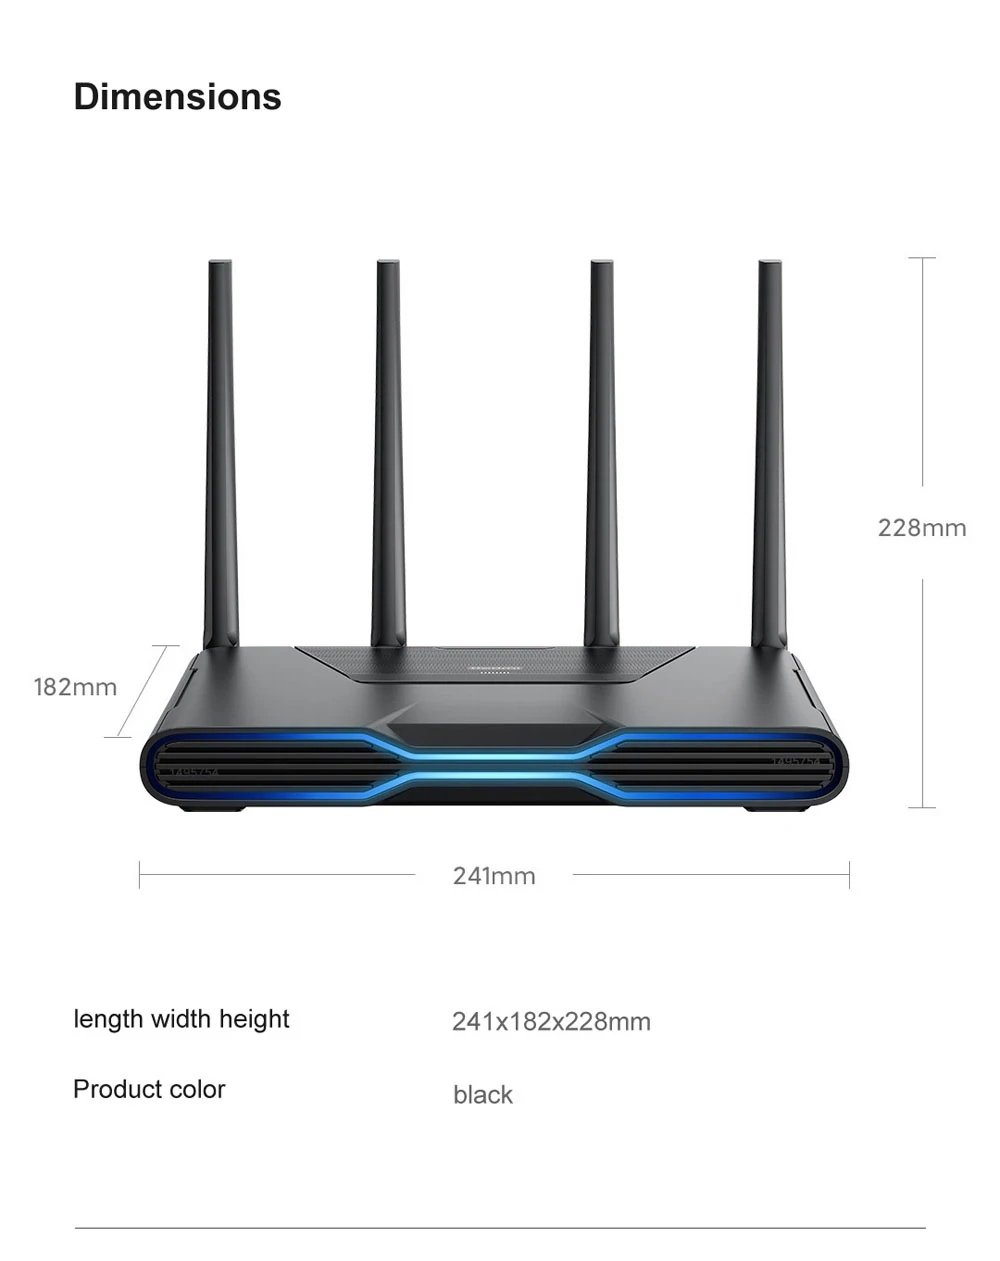 2022-Xiaomi-Redmi-AX5400-WiFi6-Gaming-Router-Dual-Band-160MHz-4K-QAM-Mesh-Repeater-Router-External-A-1970112-24